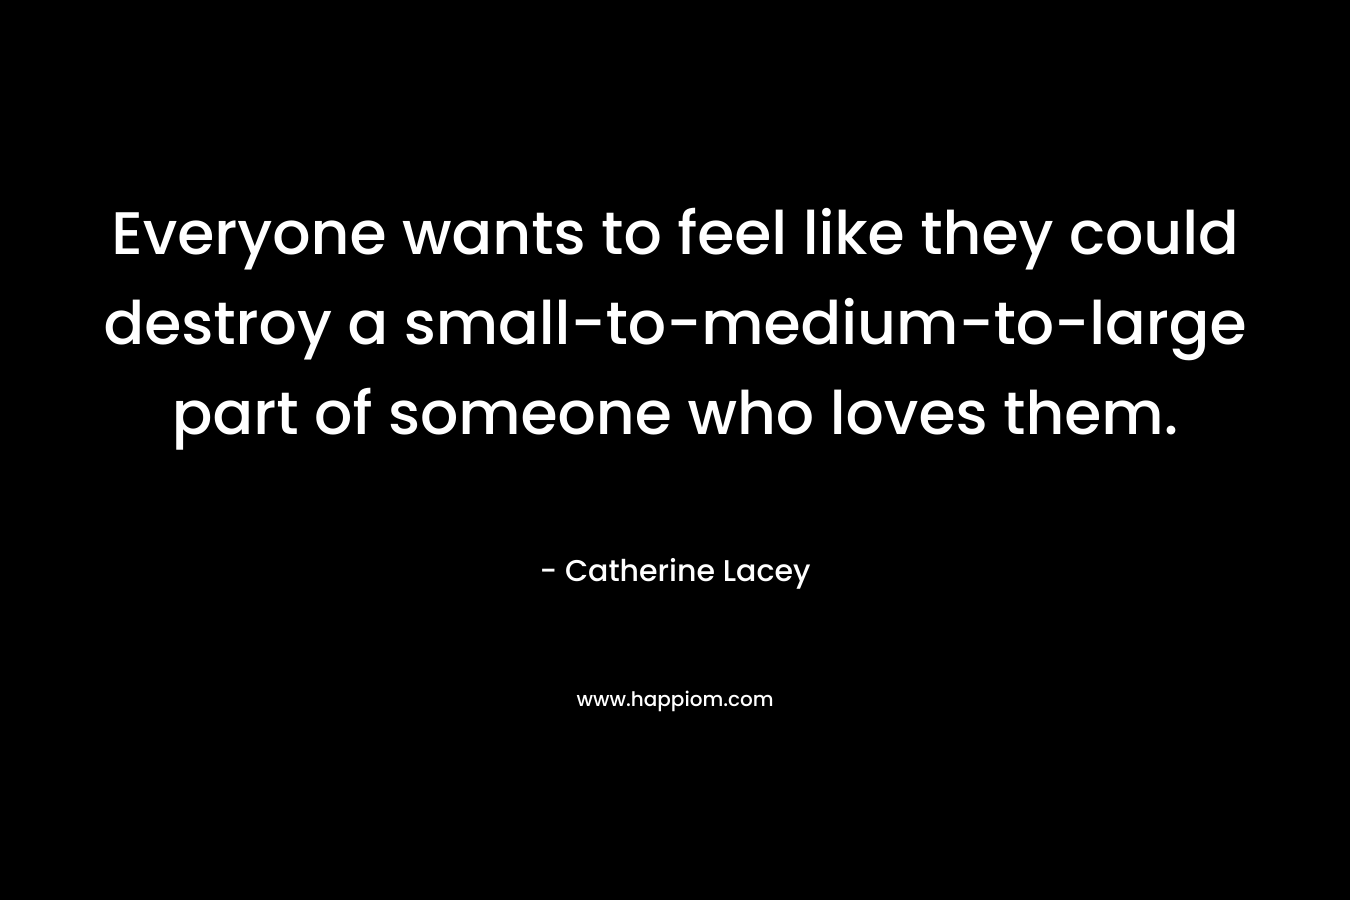 Everyone wants to feel like they could destroy a small-to-medium-to-large part of someone who loves them. – Catherine Lacey